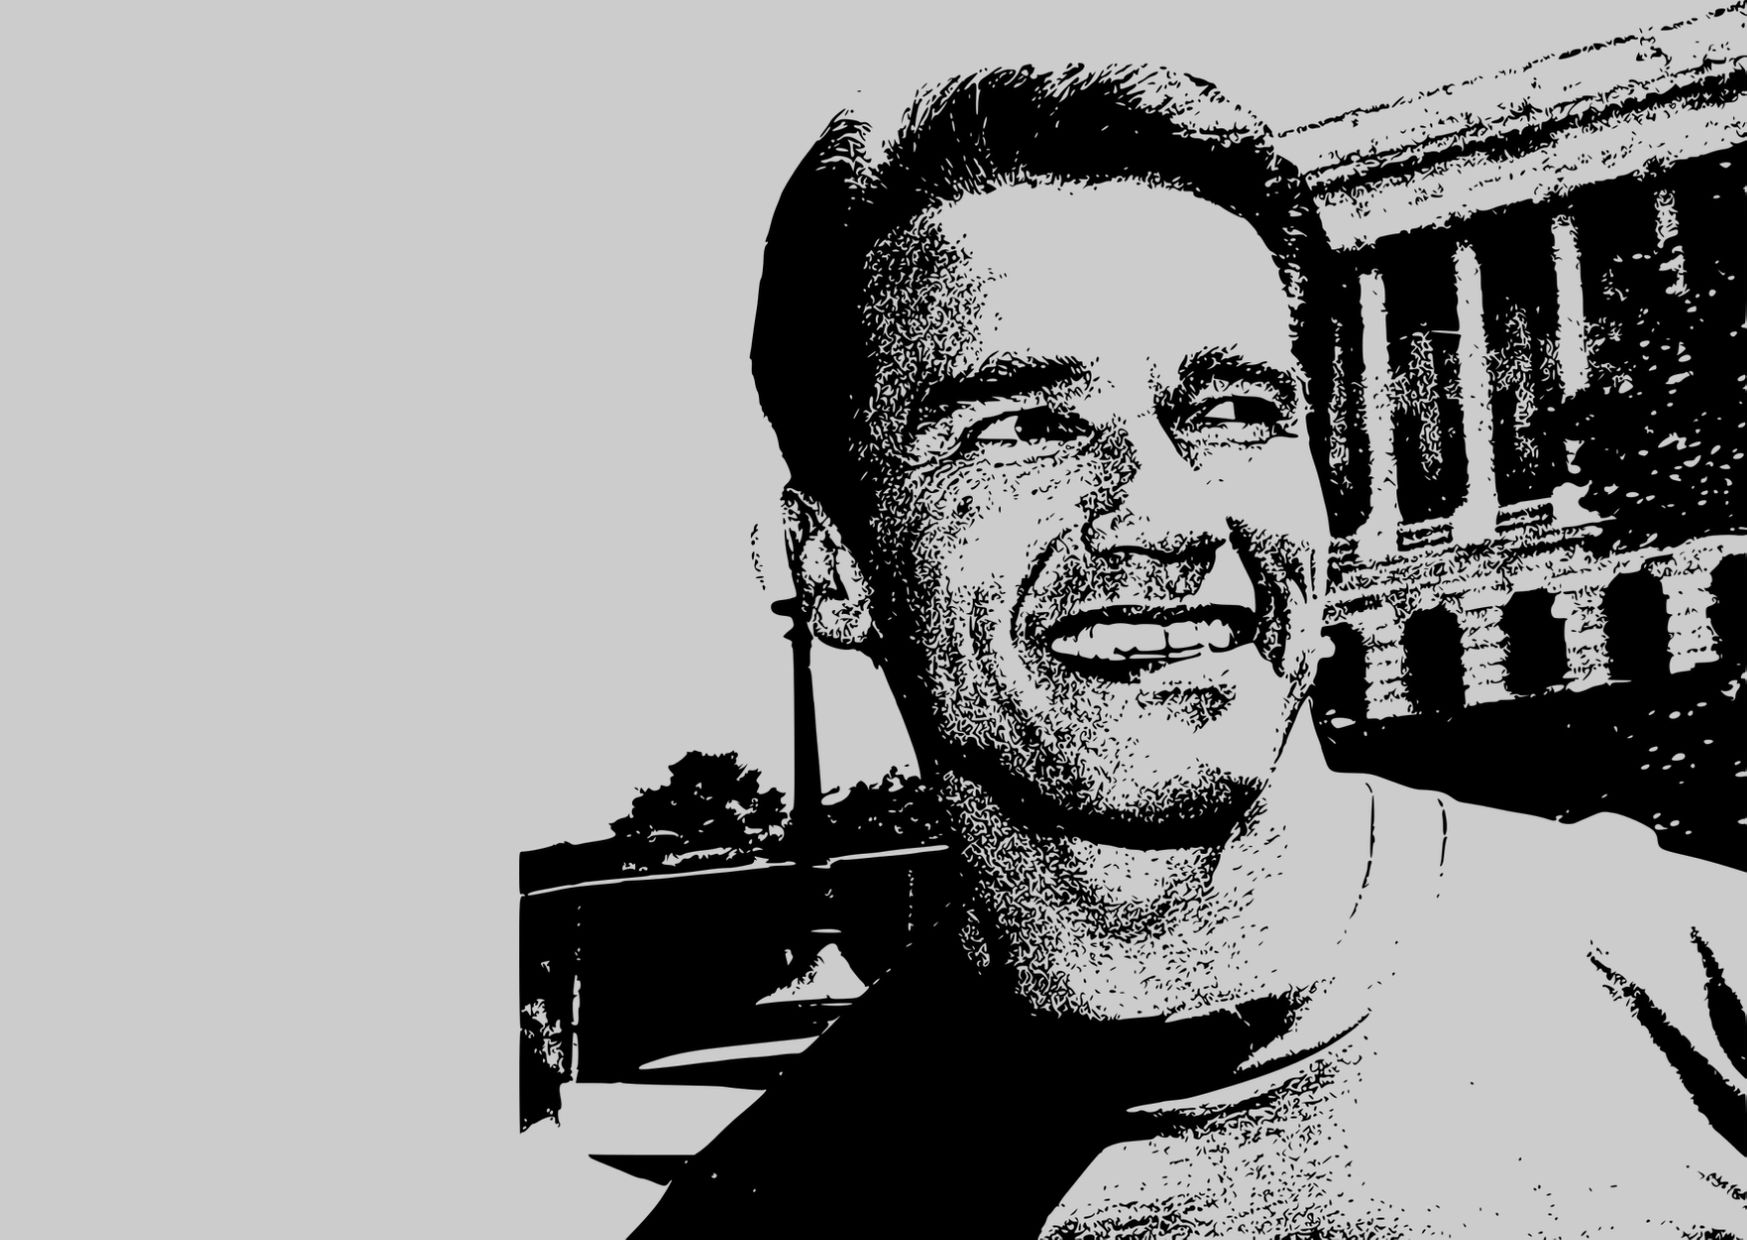 Innovation management and the life of Arnold Schwarzenegger have a lot in common.